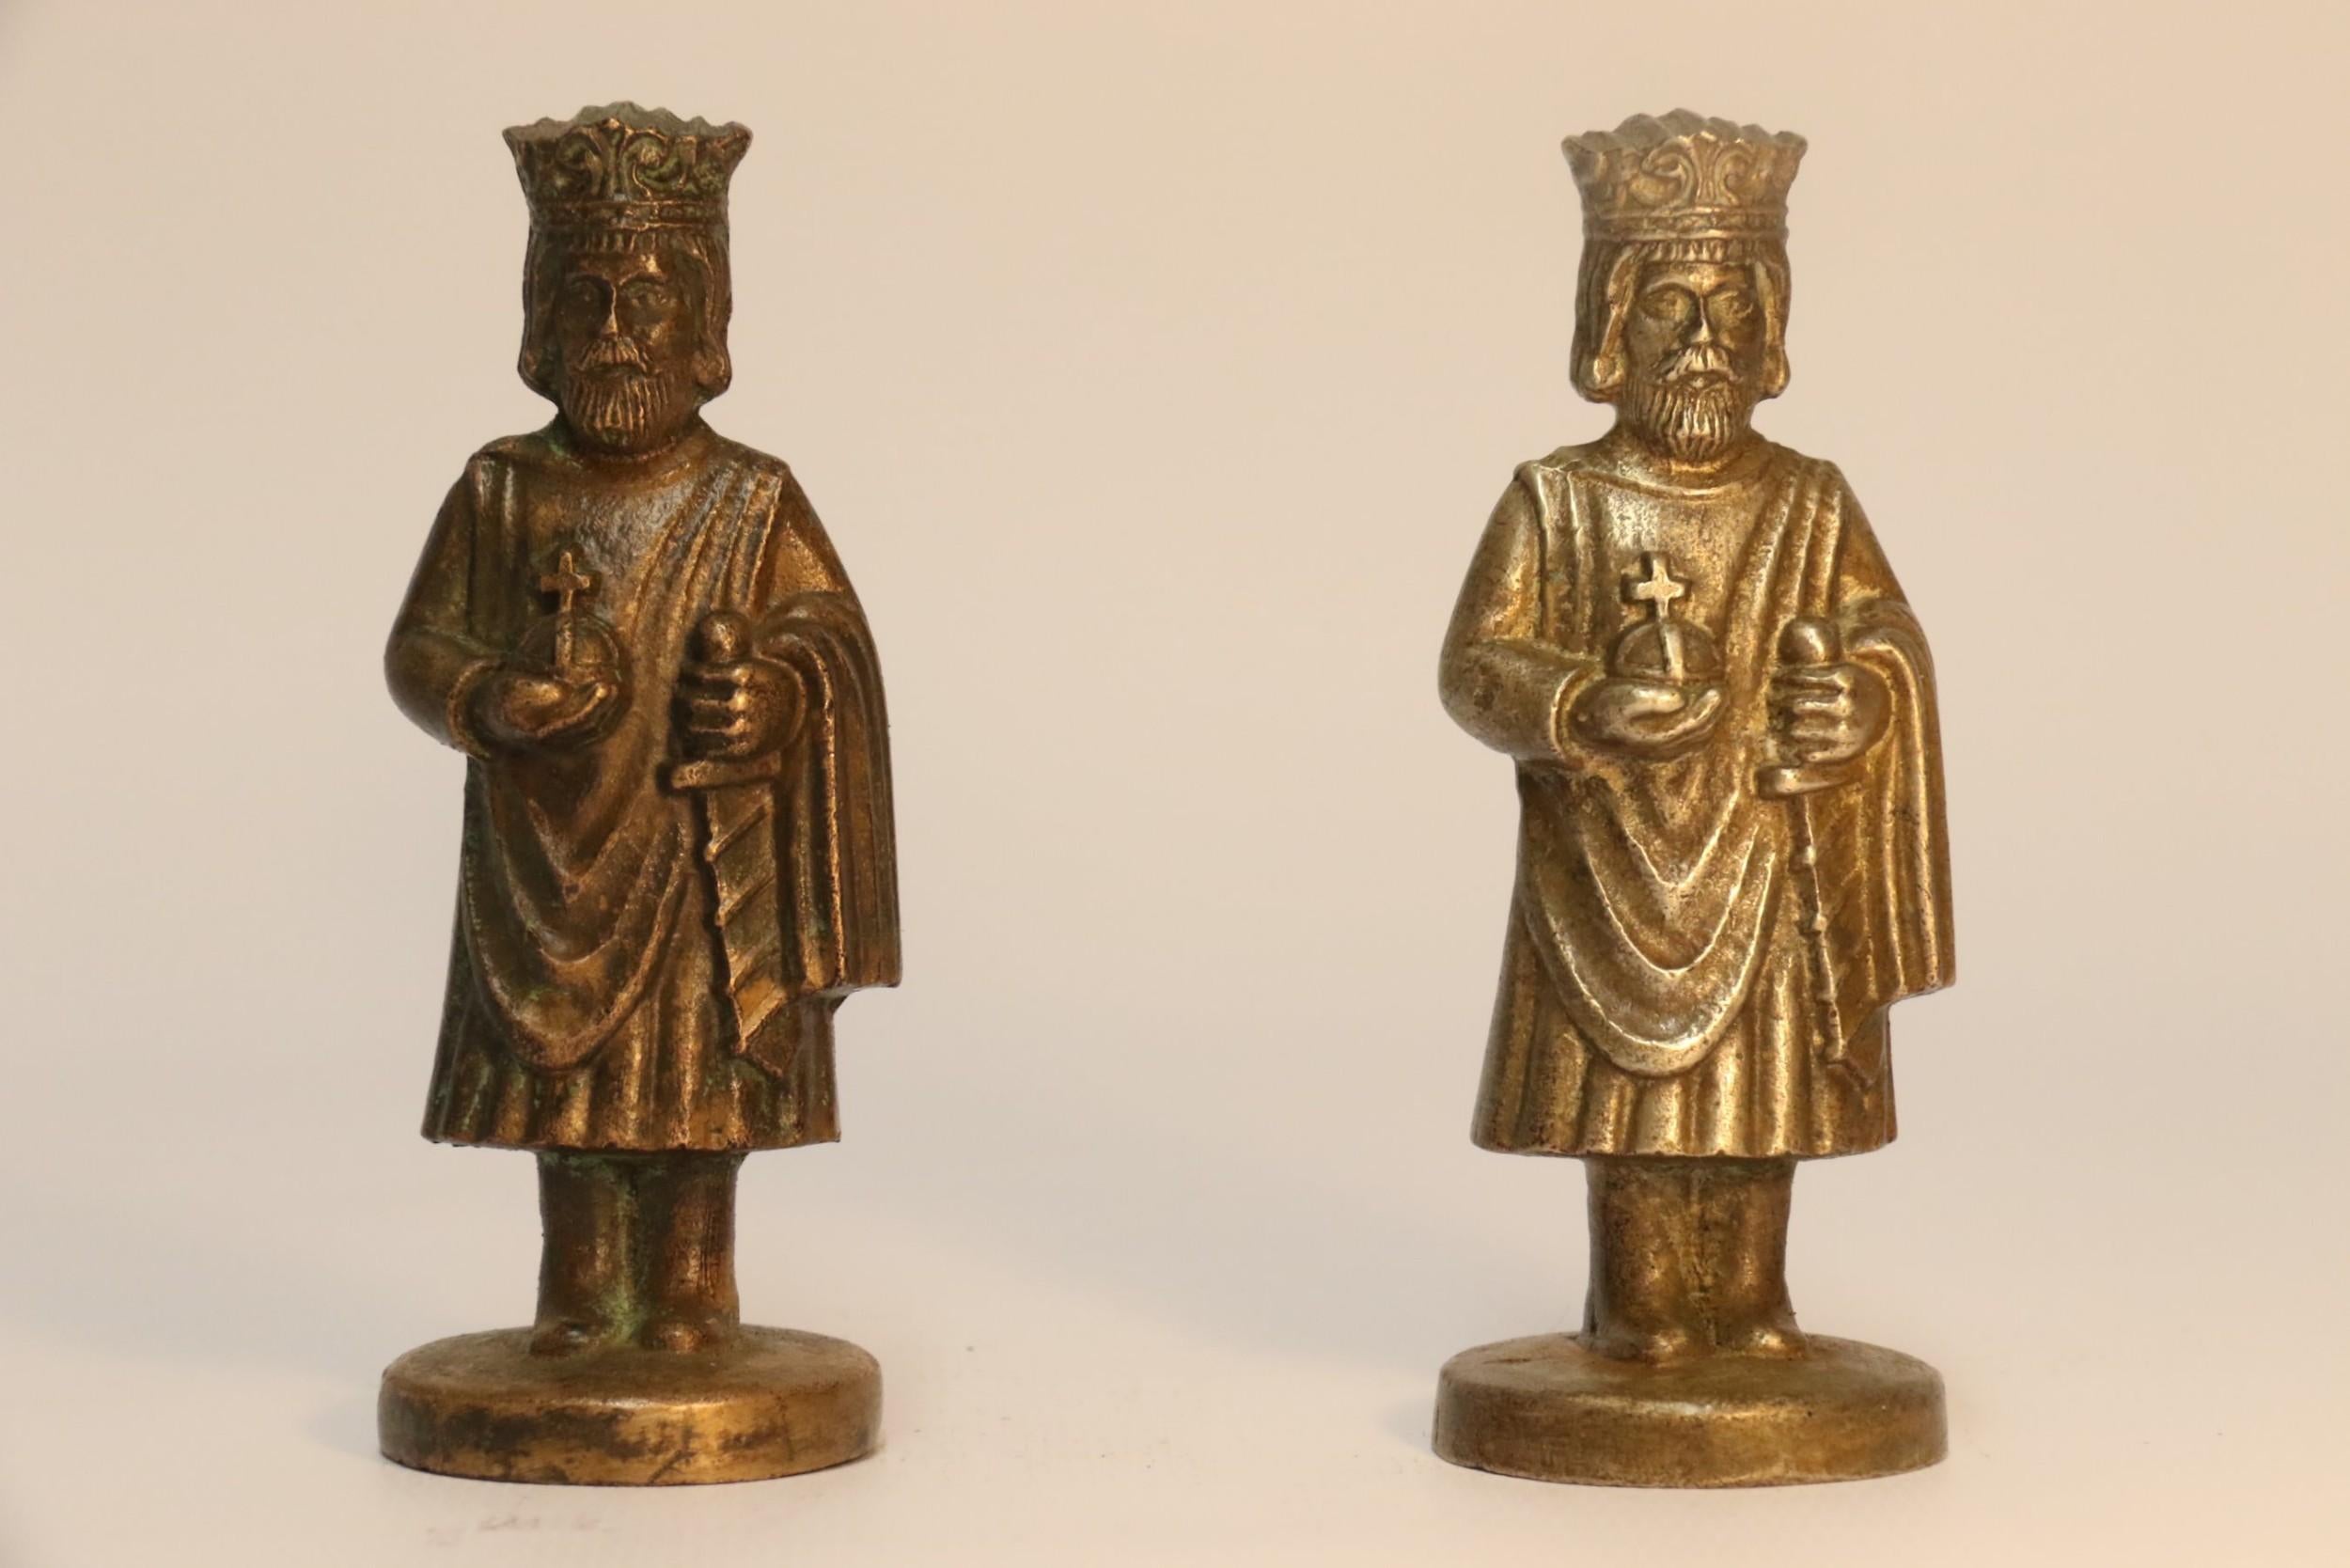 Novelty Heavy Cast Nickel and Bronze Chess Set Modeled on Medieval Figures For Sale 4